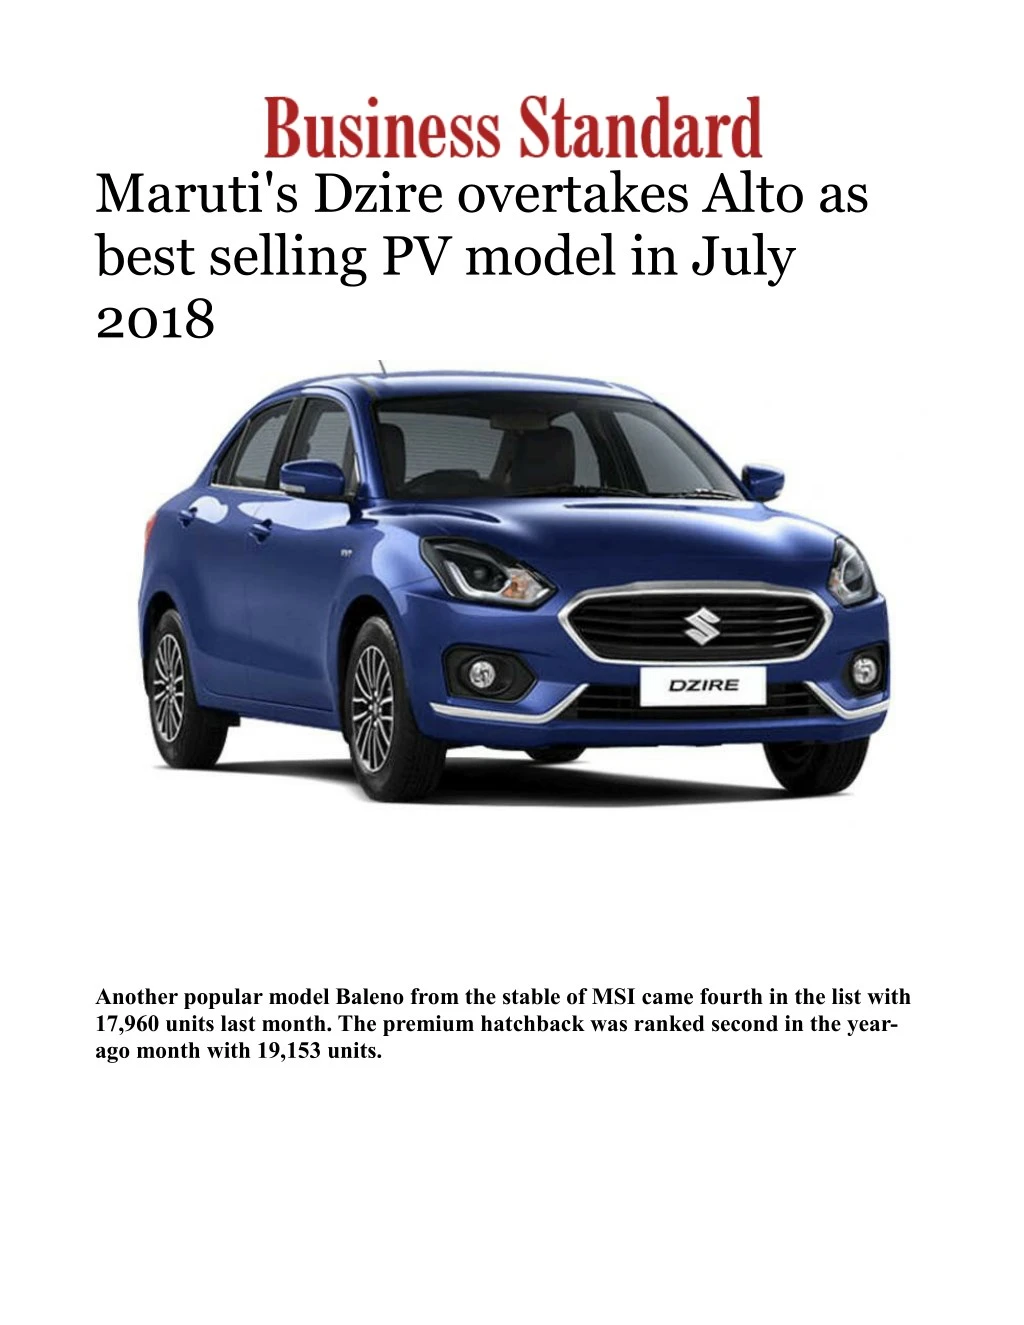 maruti s dzire overtakes alto as best selling